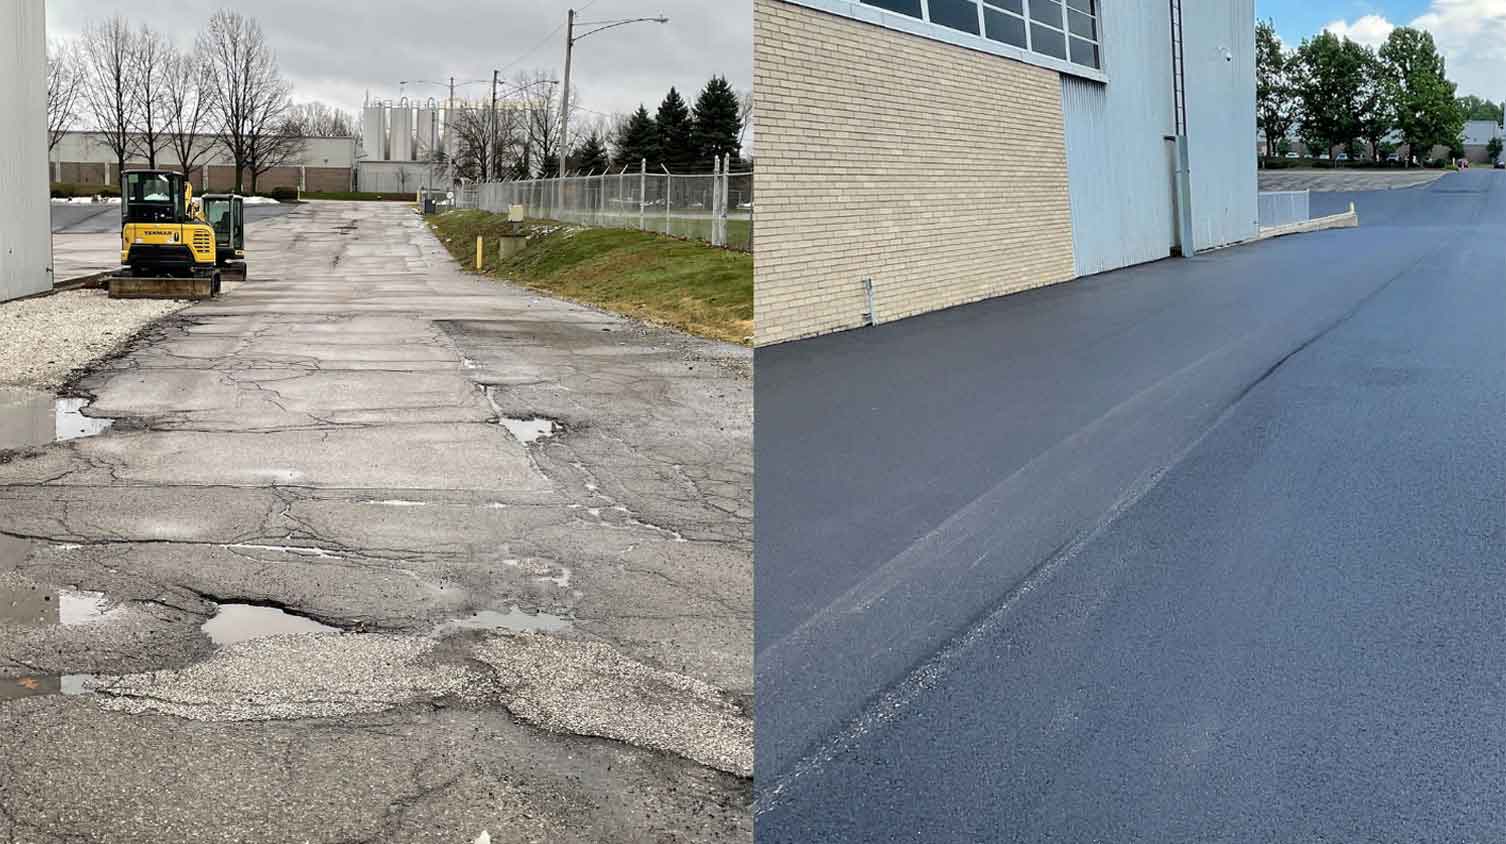 On the left, a stretch of parking lot with faded and cracked apart asphalt. On the right, a freshly paved stretch of asphalt.